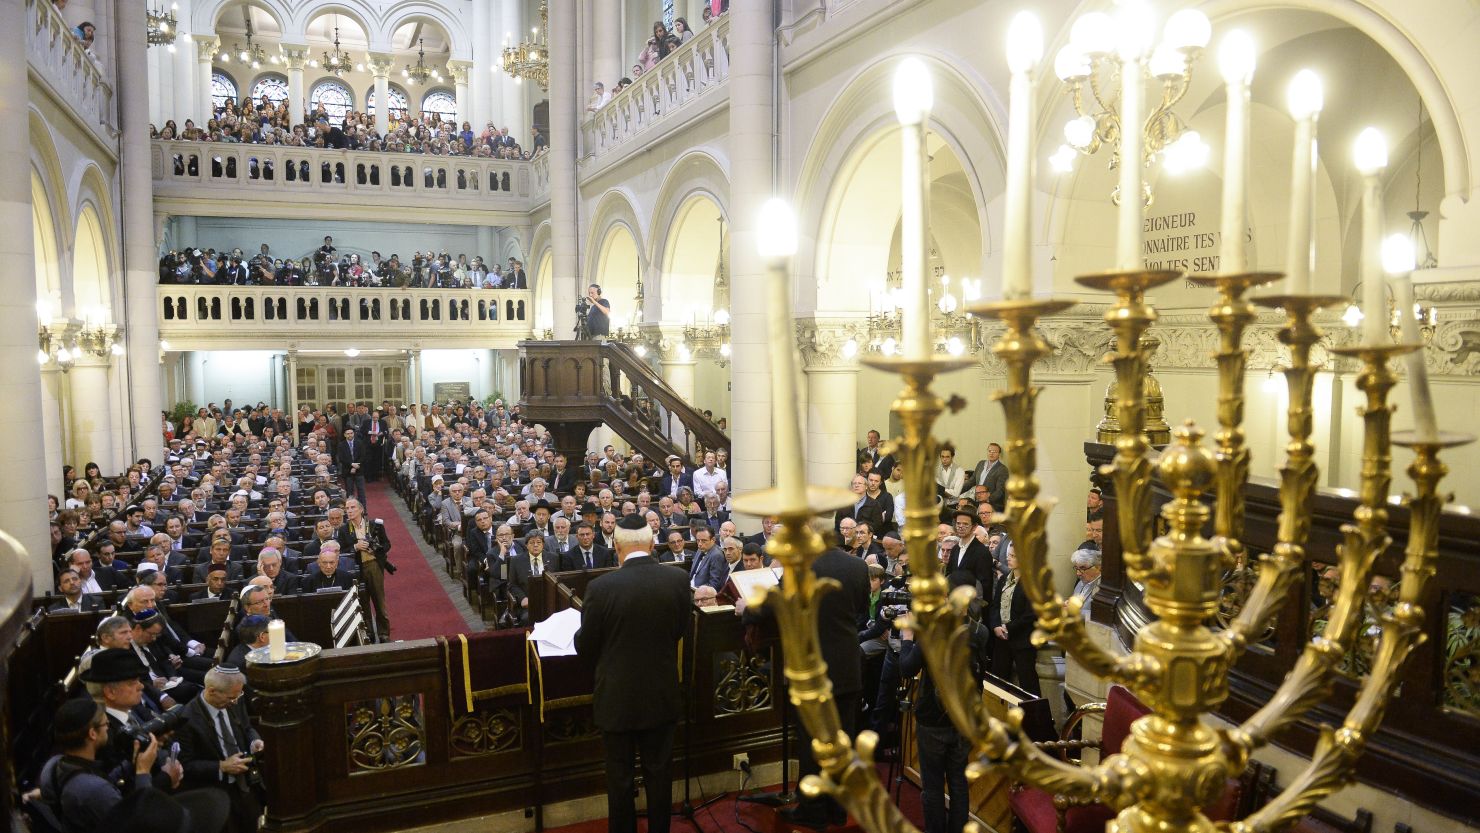 A ceremony at Brussels' Great Synagogue on June 2, 2014, following the fatal shooting at the Jewish Museum in Brussels.